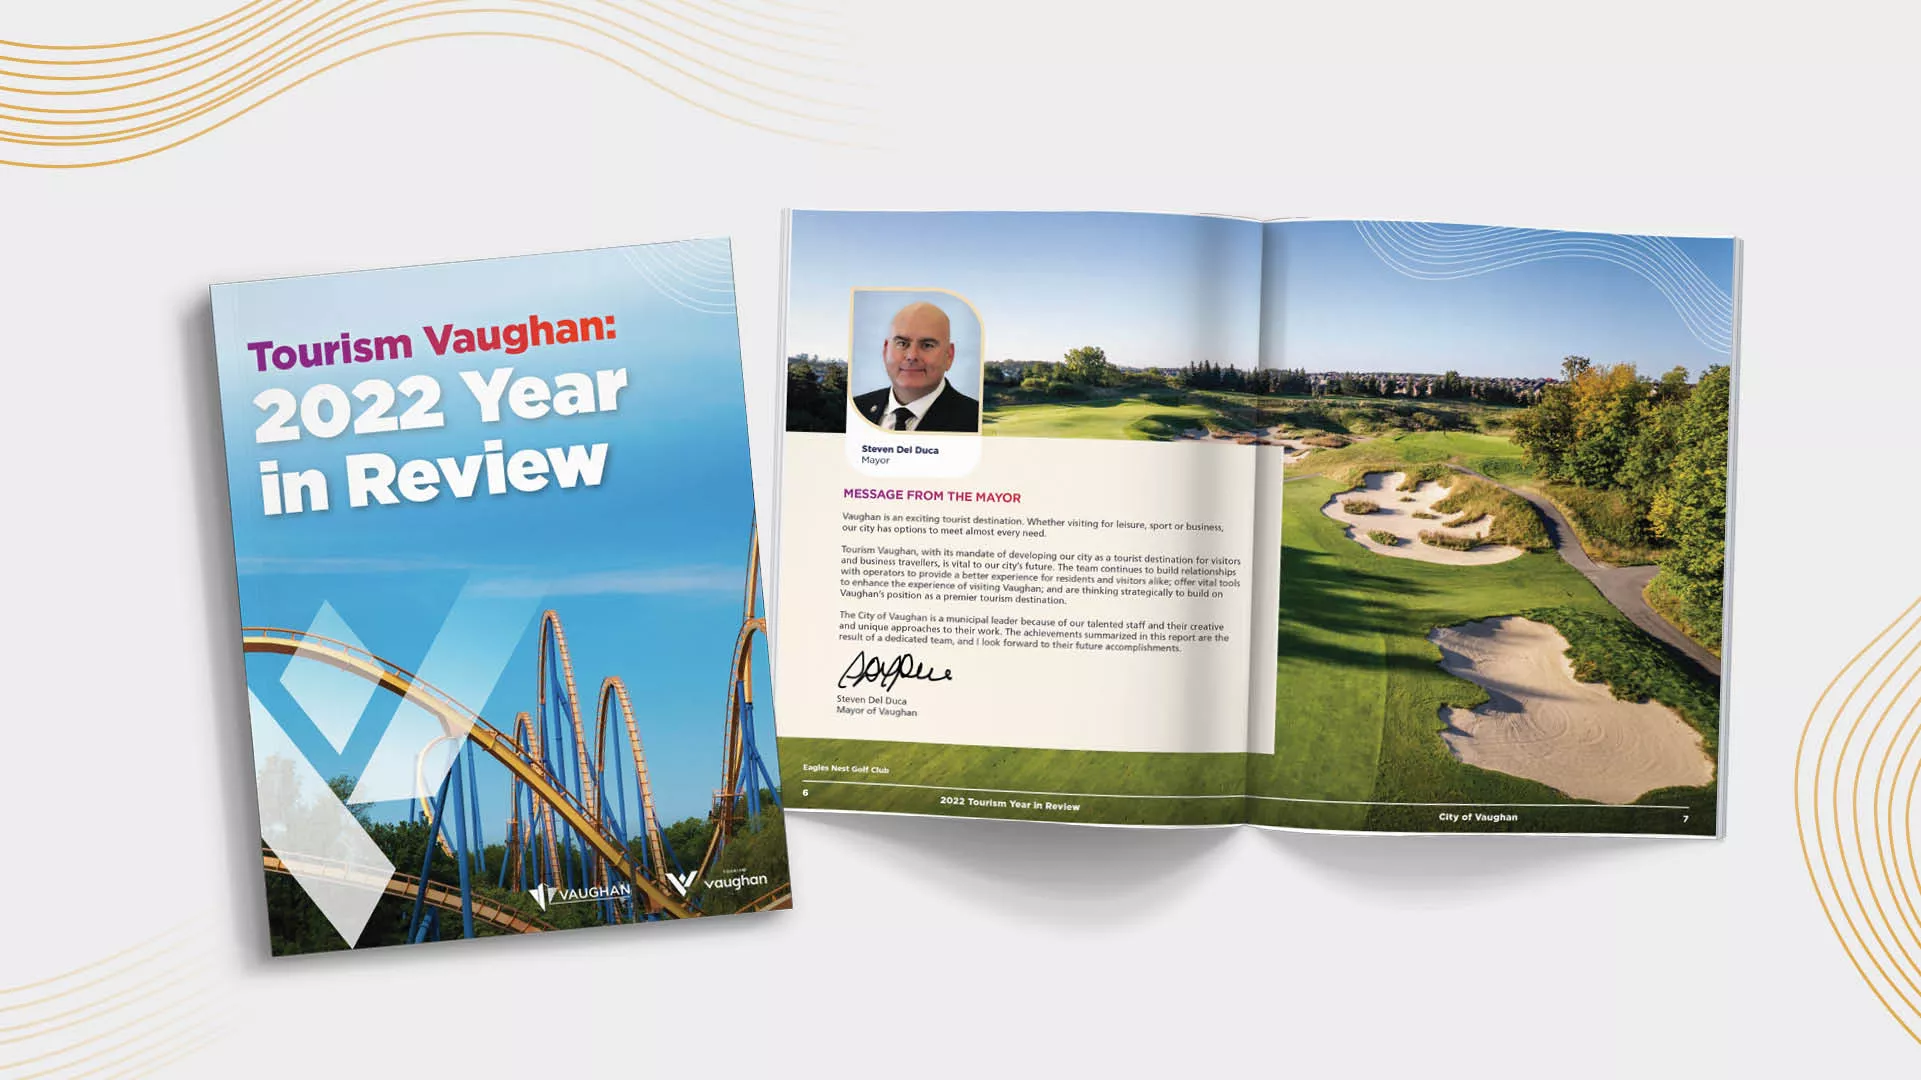 Making Vaughan a destination of choice image